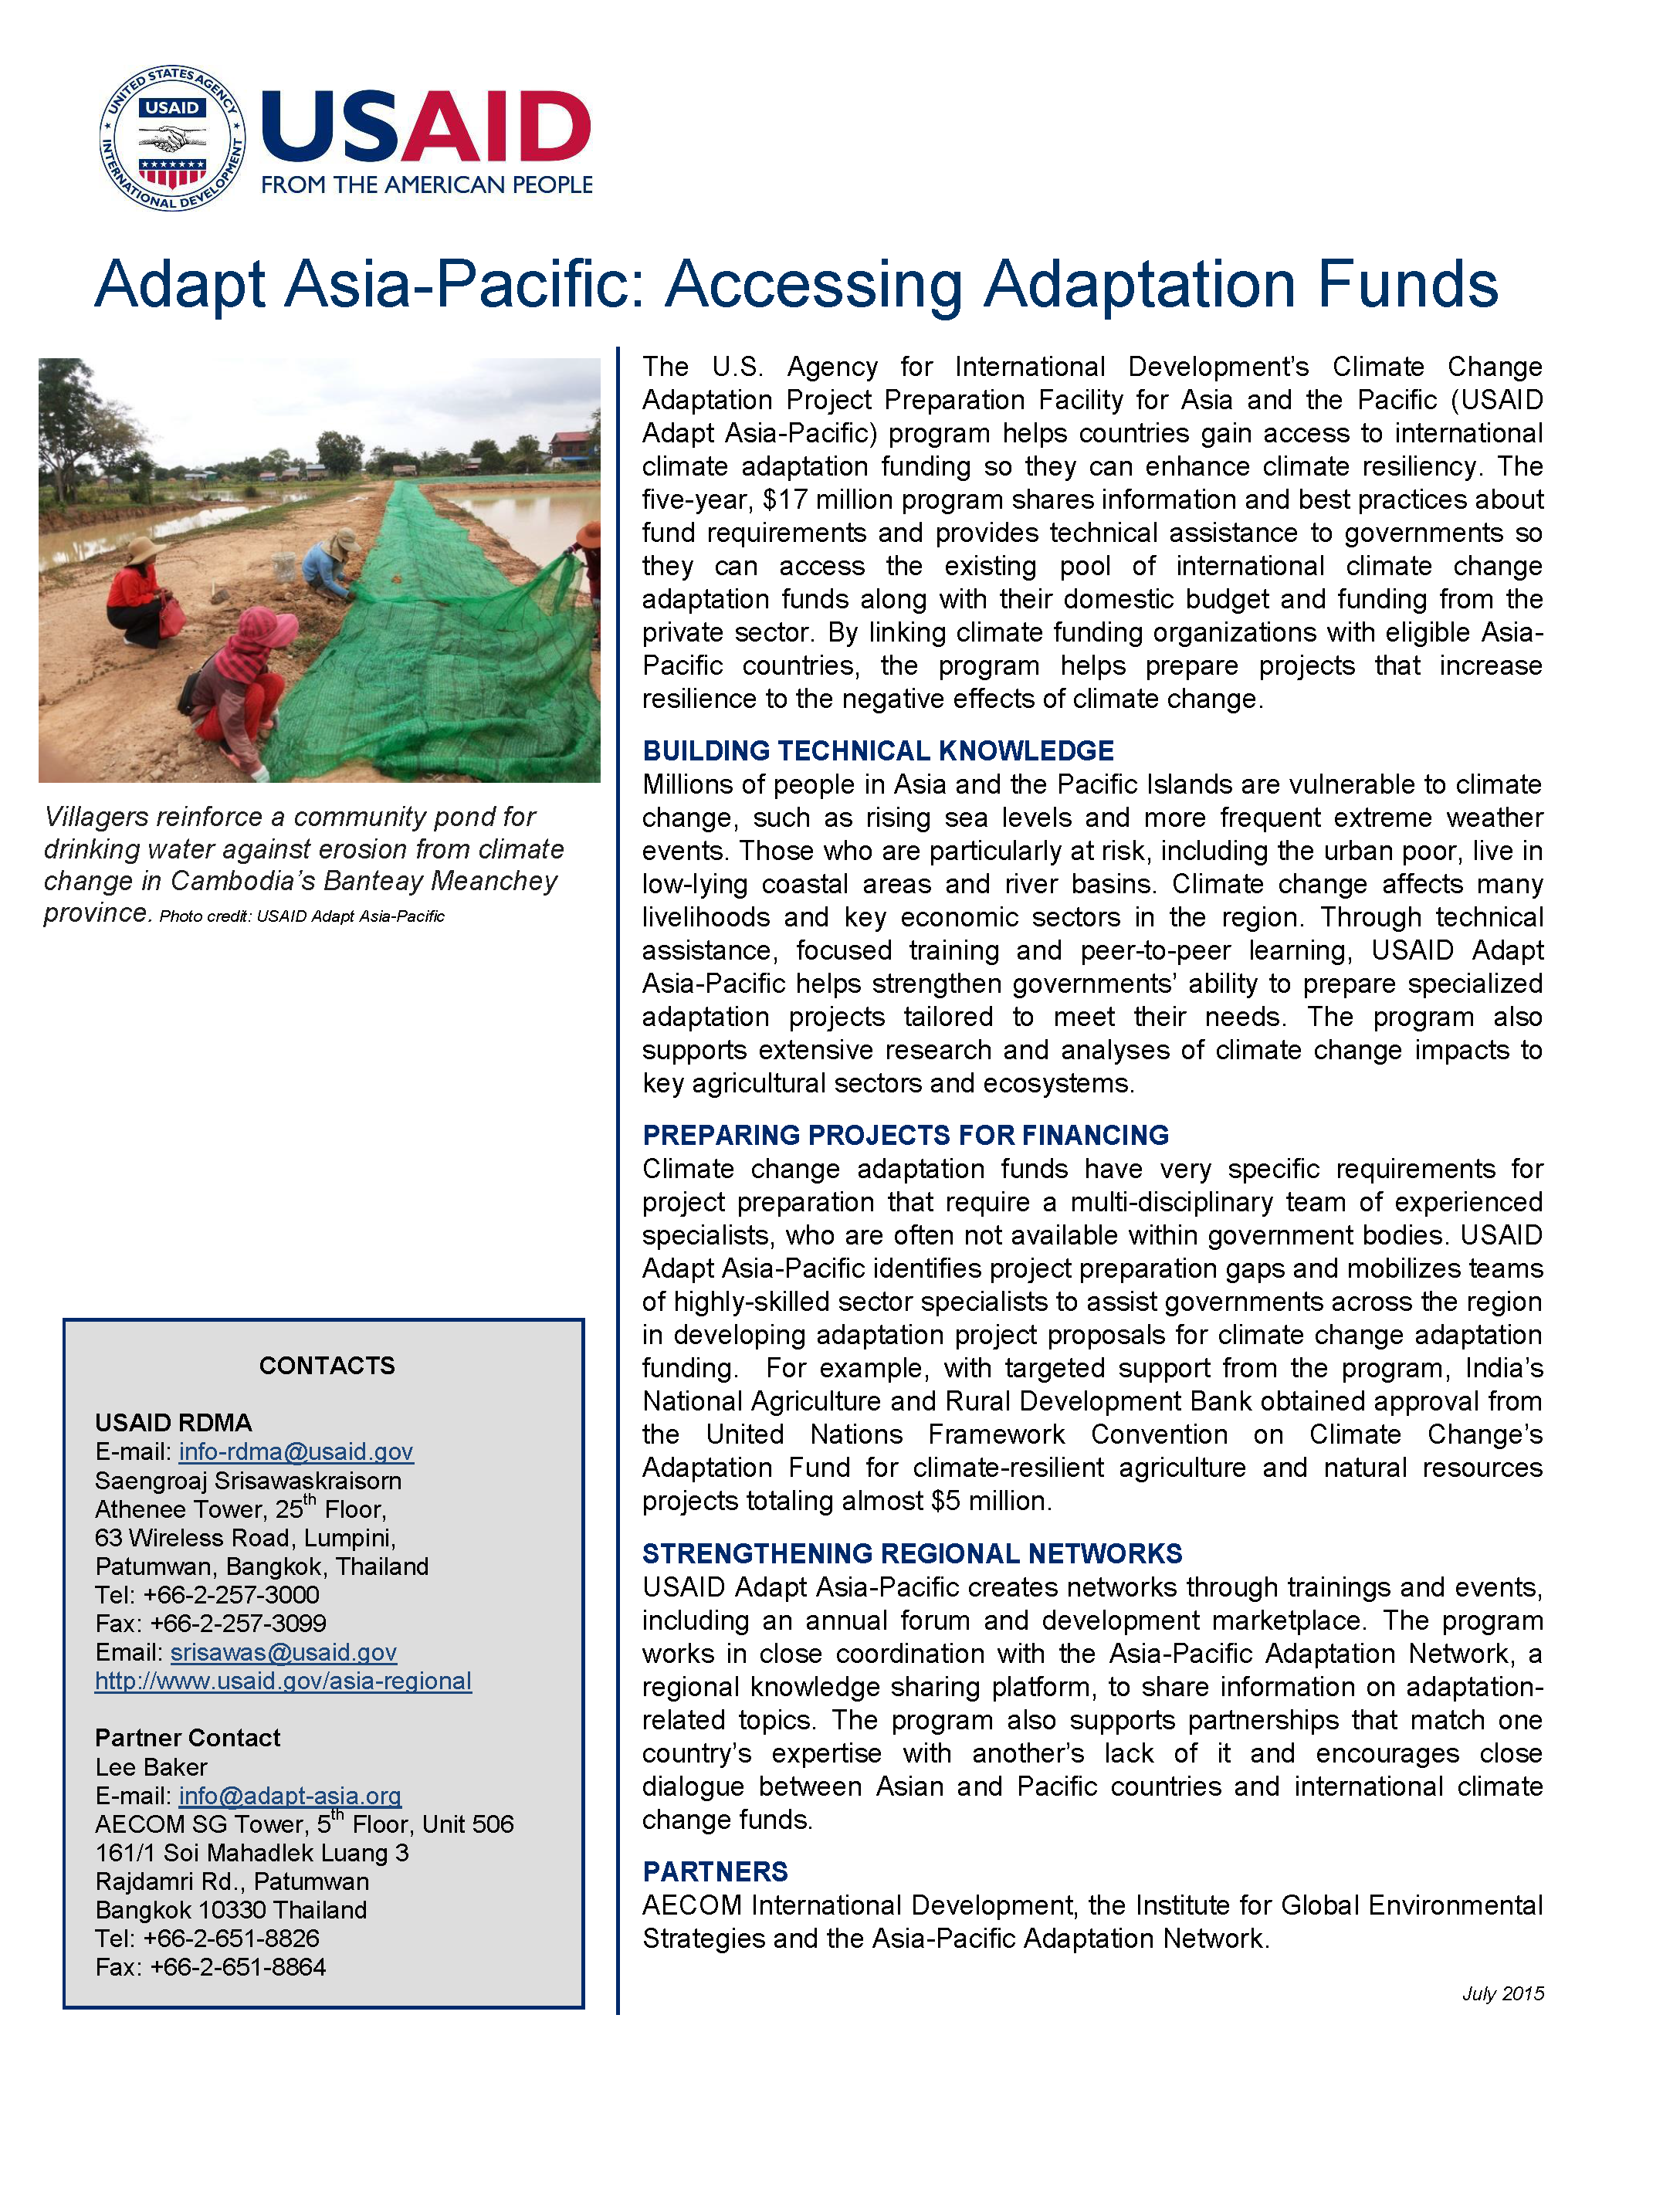 Adapt Asia-Pacific: Accessing Adaptation Funds